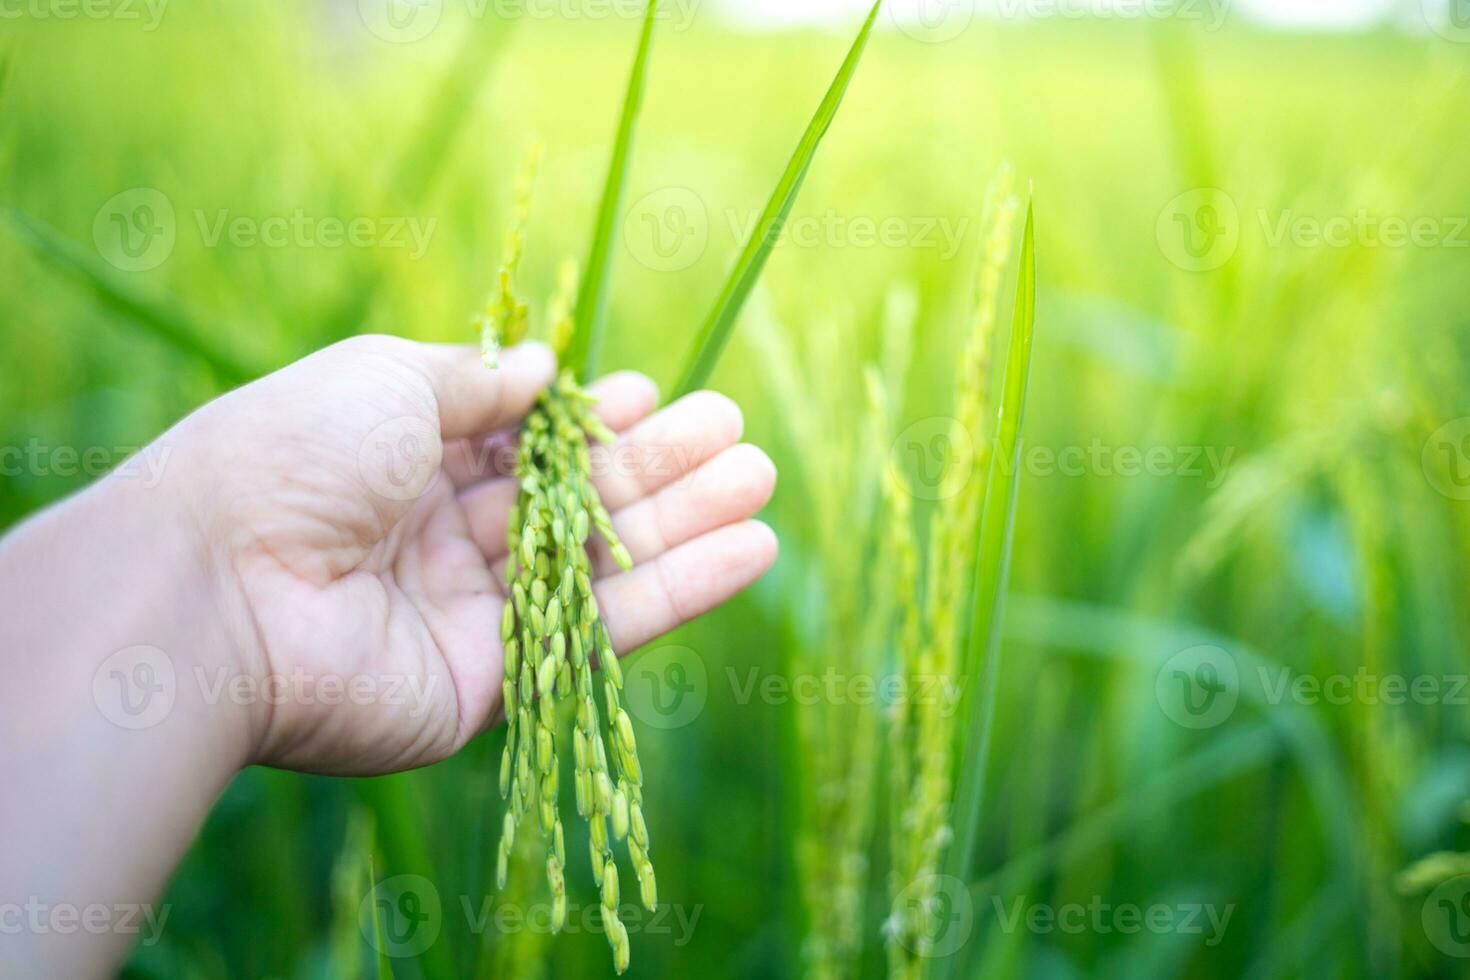 A farmer's hand touches an ear of green rice to check the yield. In the warm sunlight Ideas for growing plants without toxic substances photo